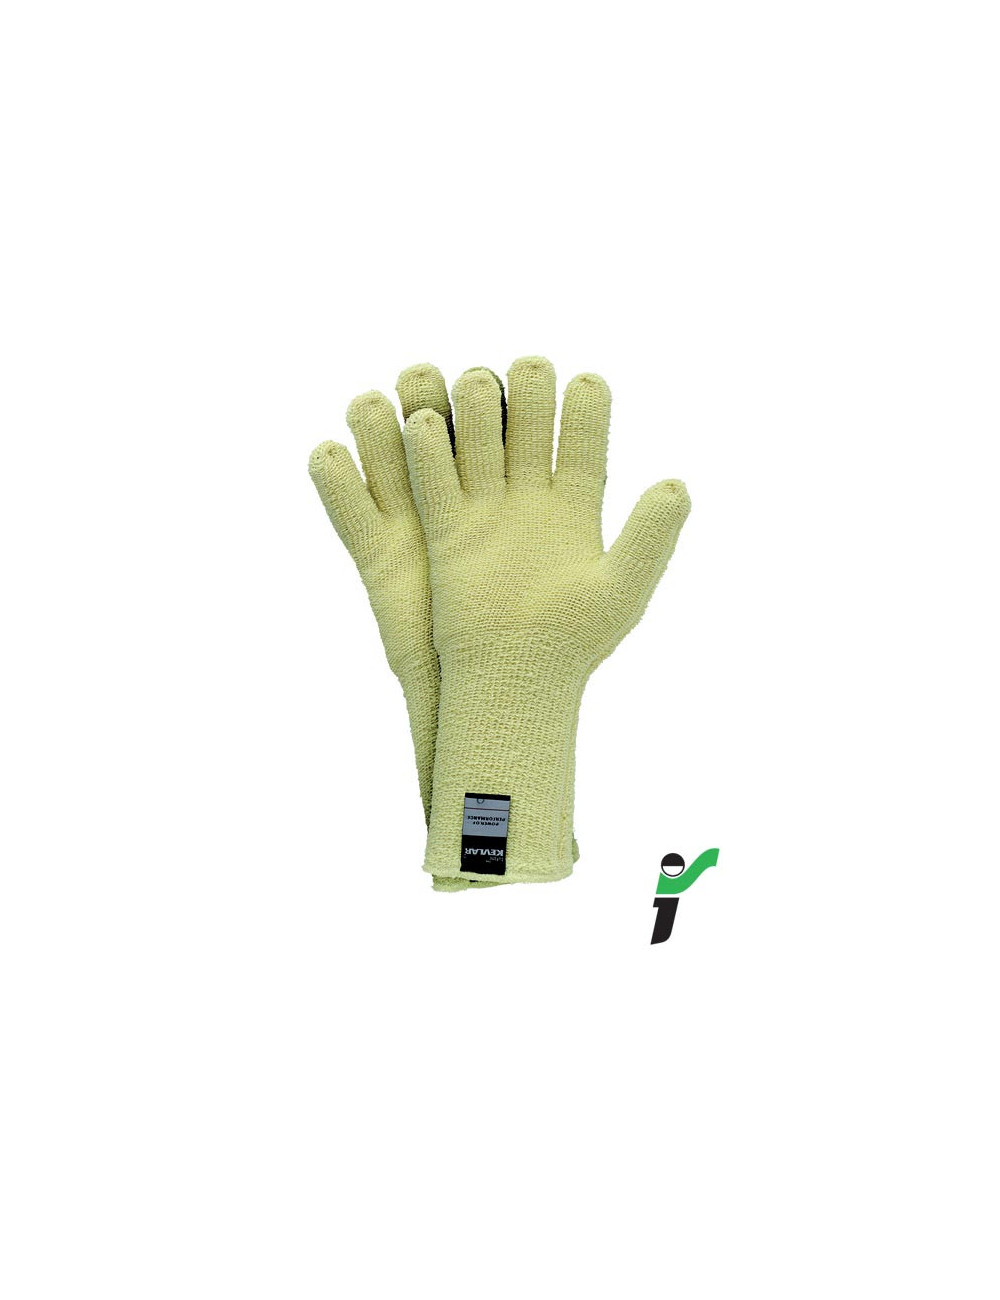 Protective gloves rj-kefro35 y yellow JS